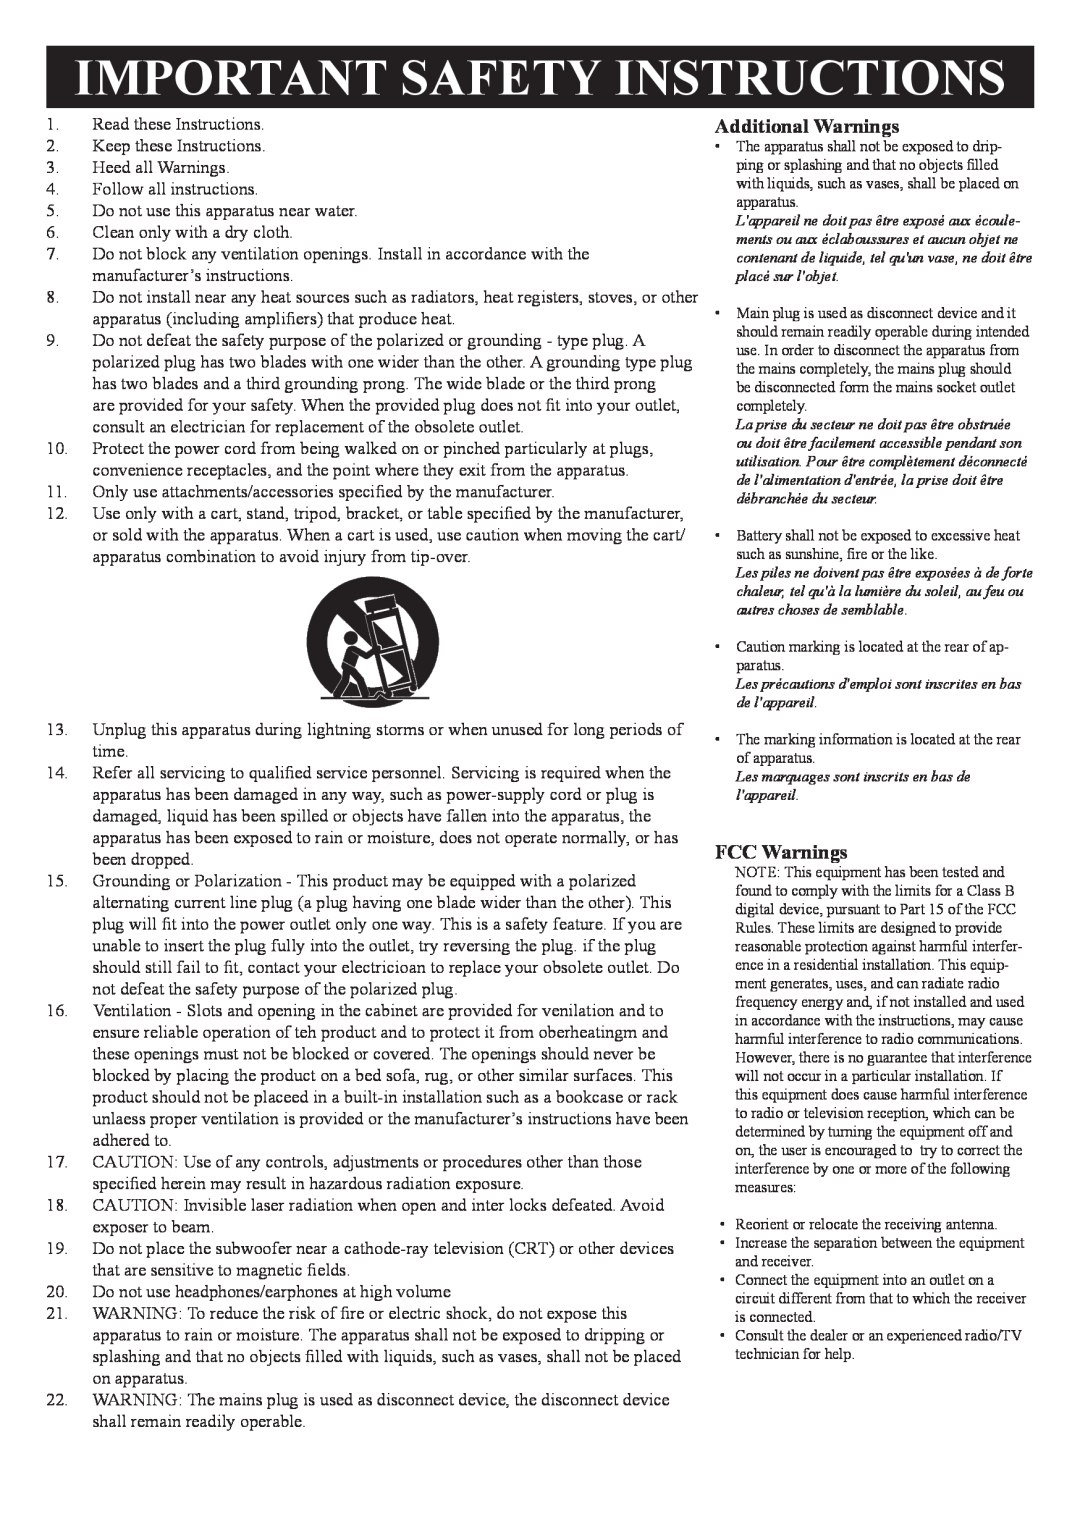 GPX HT219B manual Important Safety Instructions, Additional Warnings, FCC Warnings 